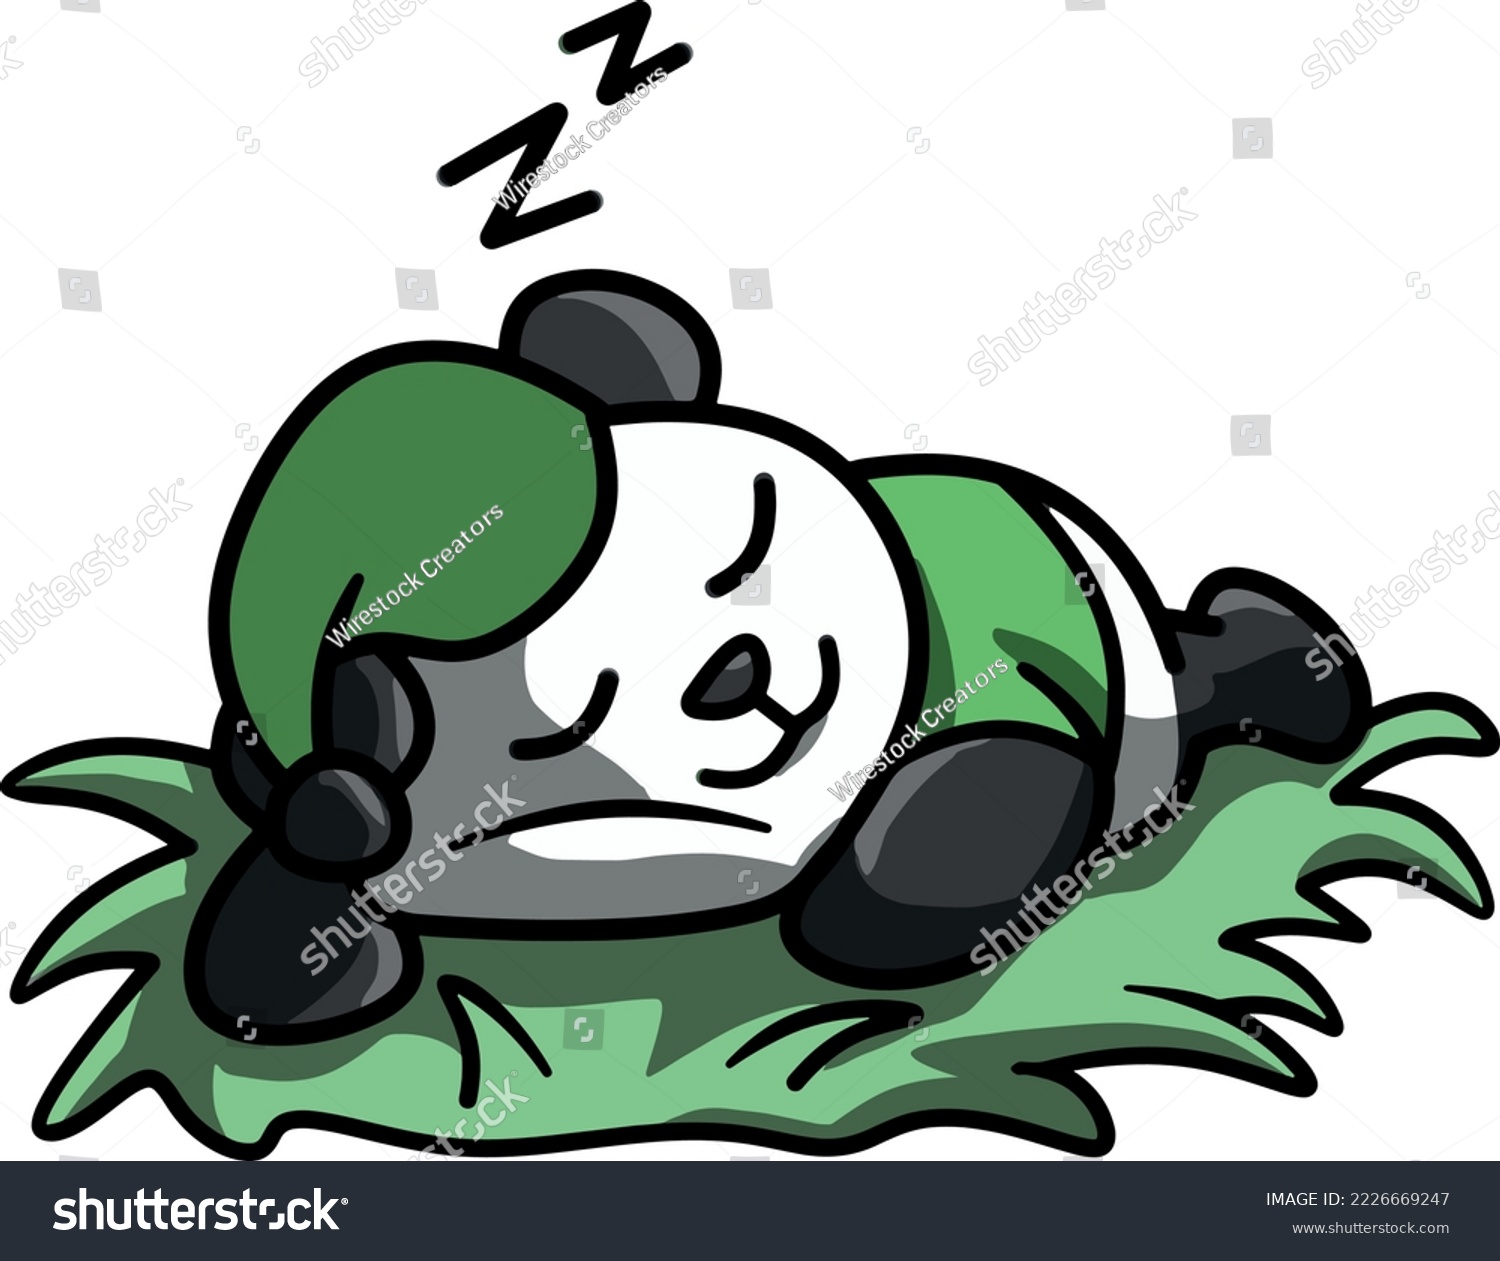 SVG of A cartoon-style cute panda sleeping on grass isolated on a white background  svg